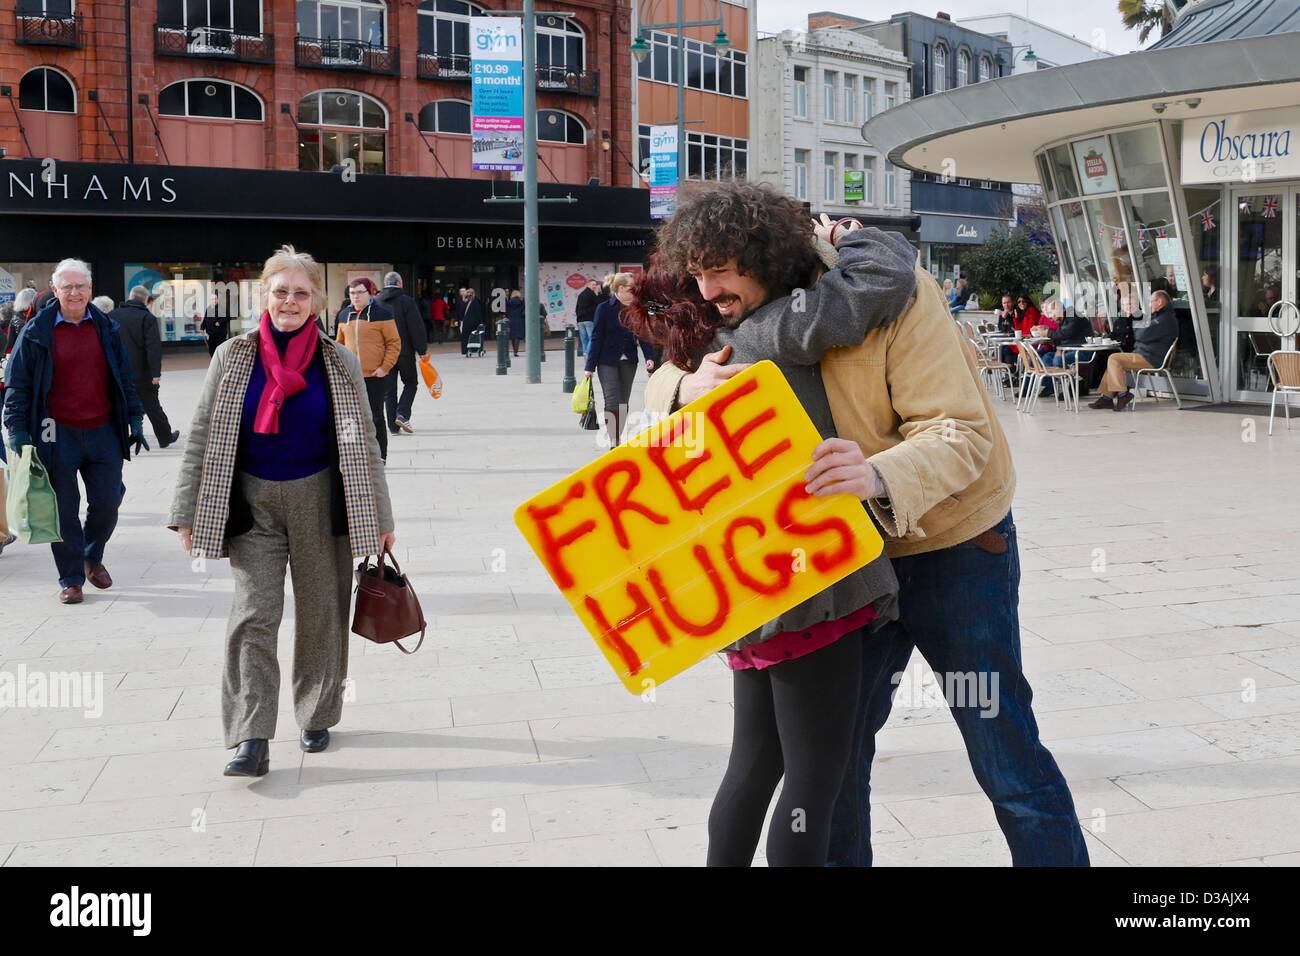 Bournemouth, UK. 14th February 2013. The free Hugs campaign involves individuals who offer hugs to strangers. The intention is to make others feel better as a result of a random act of kindness. Chris, the young man in the picture, said 'hugs should be for every day and not just Valentines Day'. Credit: Tom Corban/Alamy live News Stock Photo